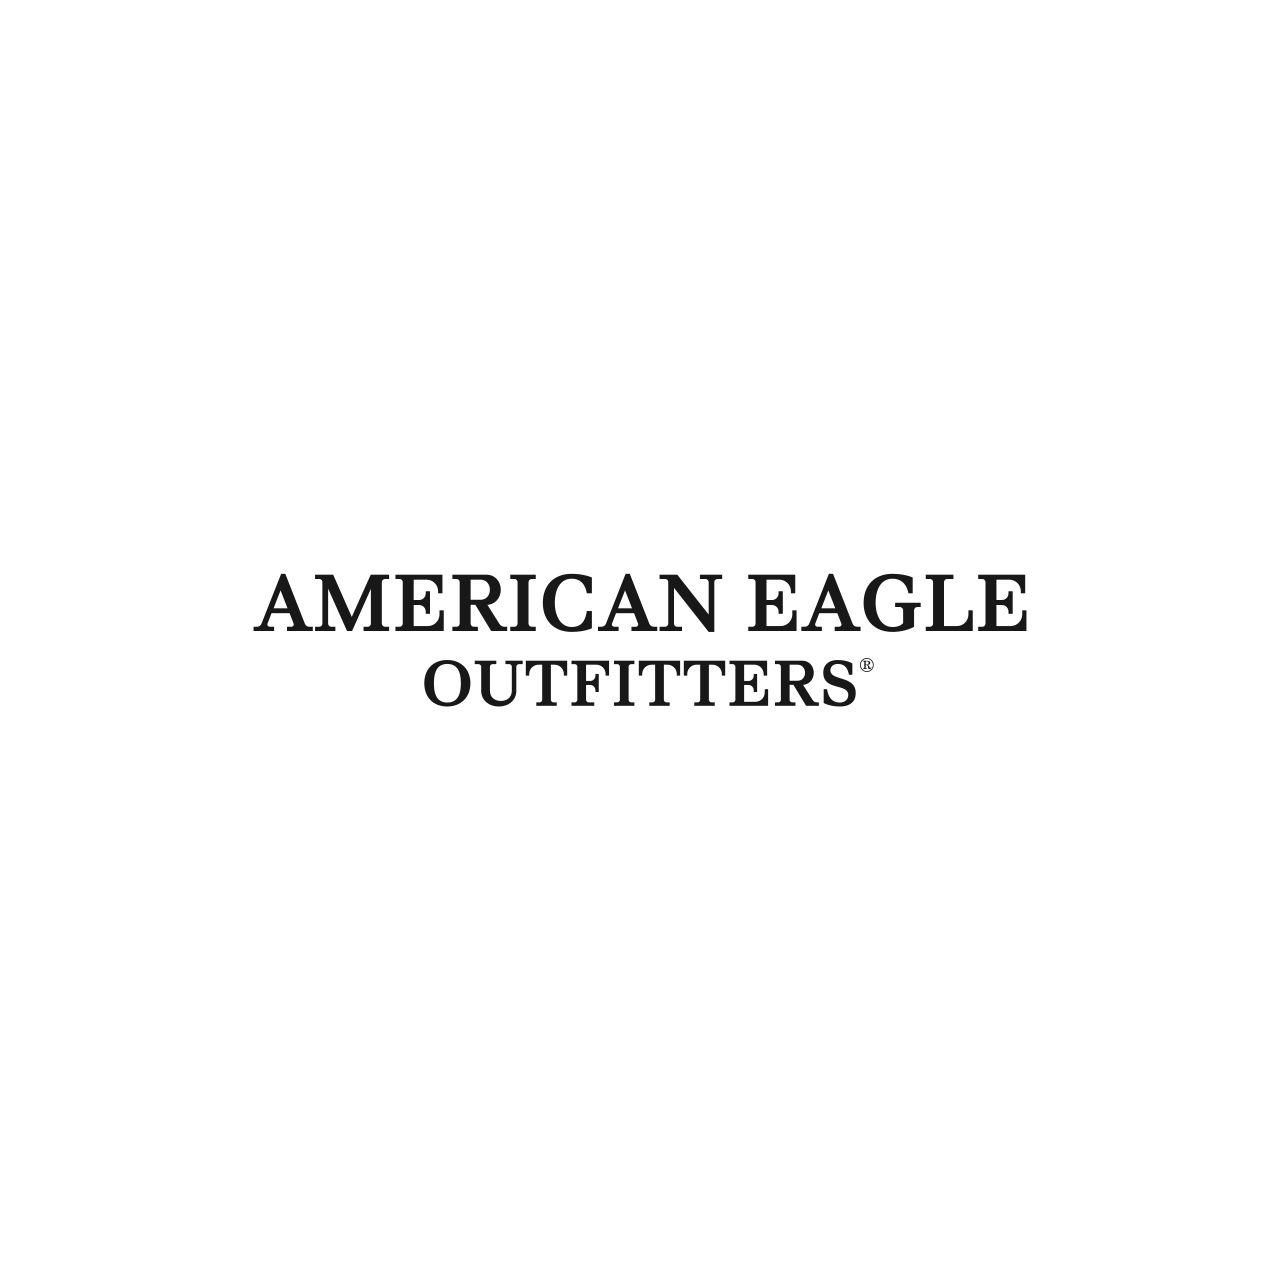 American Eagle Outfitters Logo - American Eagle Outfitters | The Outlet Collection at Riverwalk